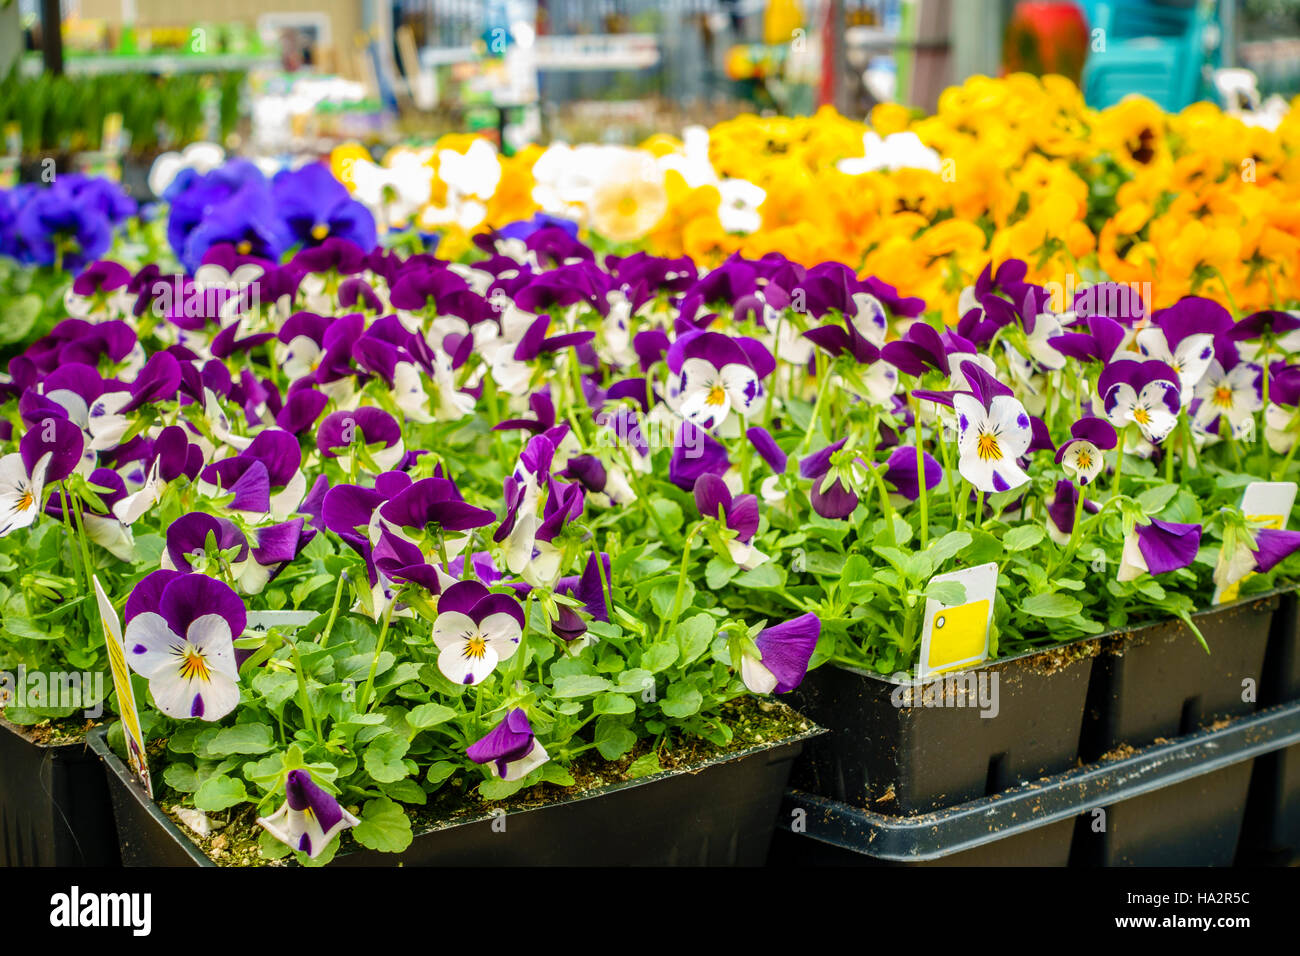 Potted flowers and plants on display at a home improvement store in spring Stock Photo